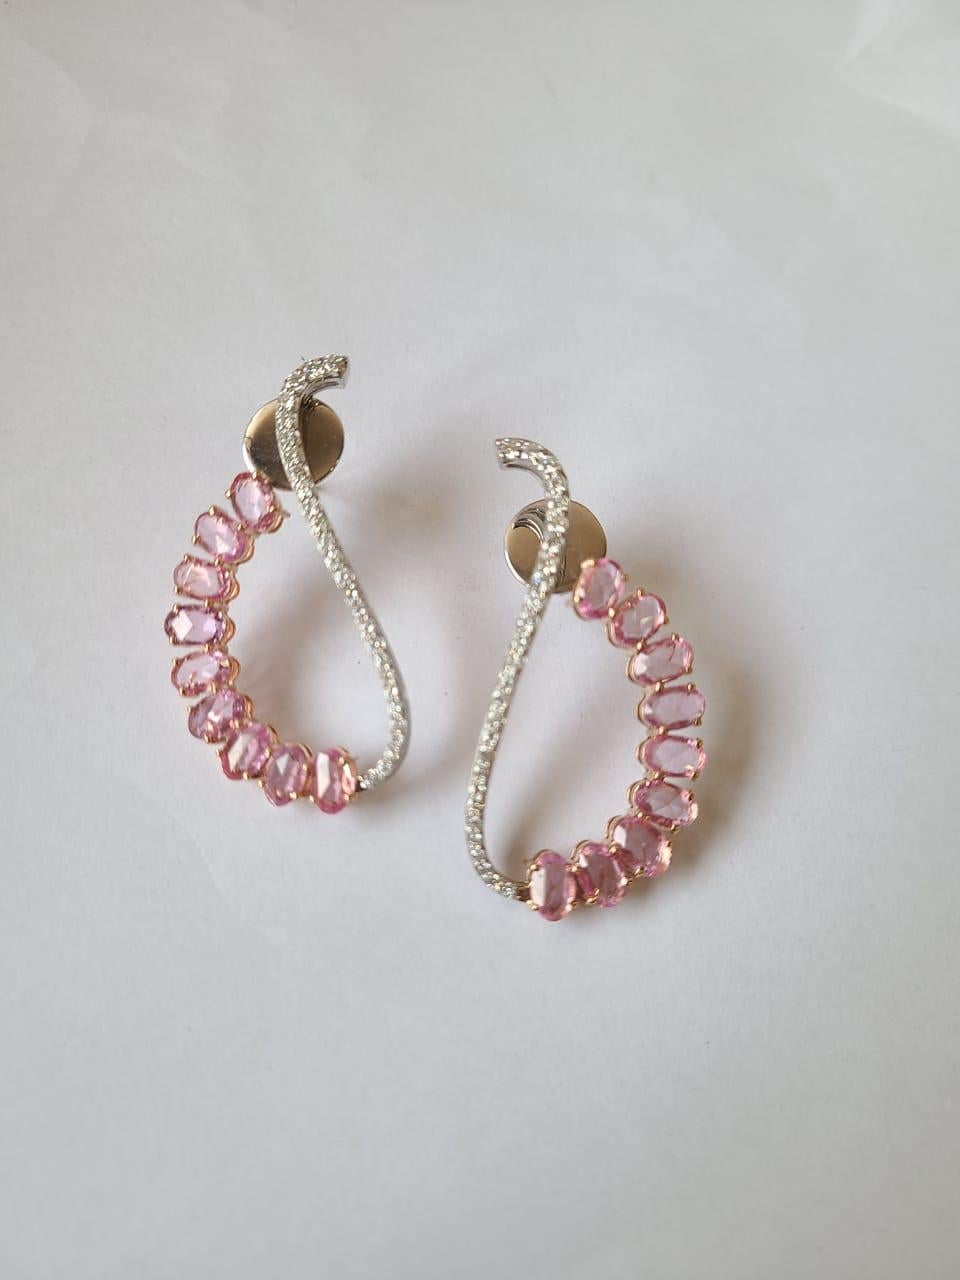 A very gorgeous and one of a kind, Pink Sapphire Chandelier Earrings set in 18K Rose Gold & Diamonds. The weight of the Pink Sapphires is 6.27 carats. The Pink Sapphires are of Madagascar origin. The weight of the Diamonds is 1.02 carats. Net Gold